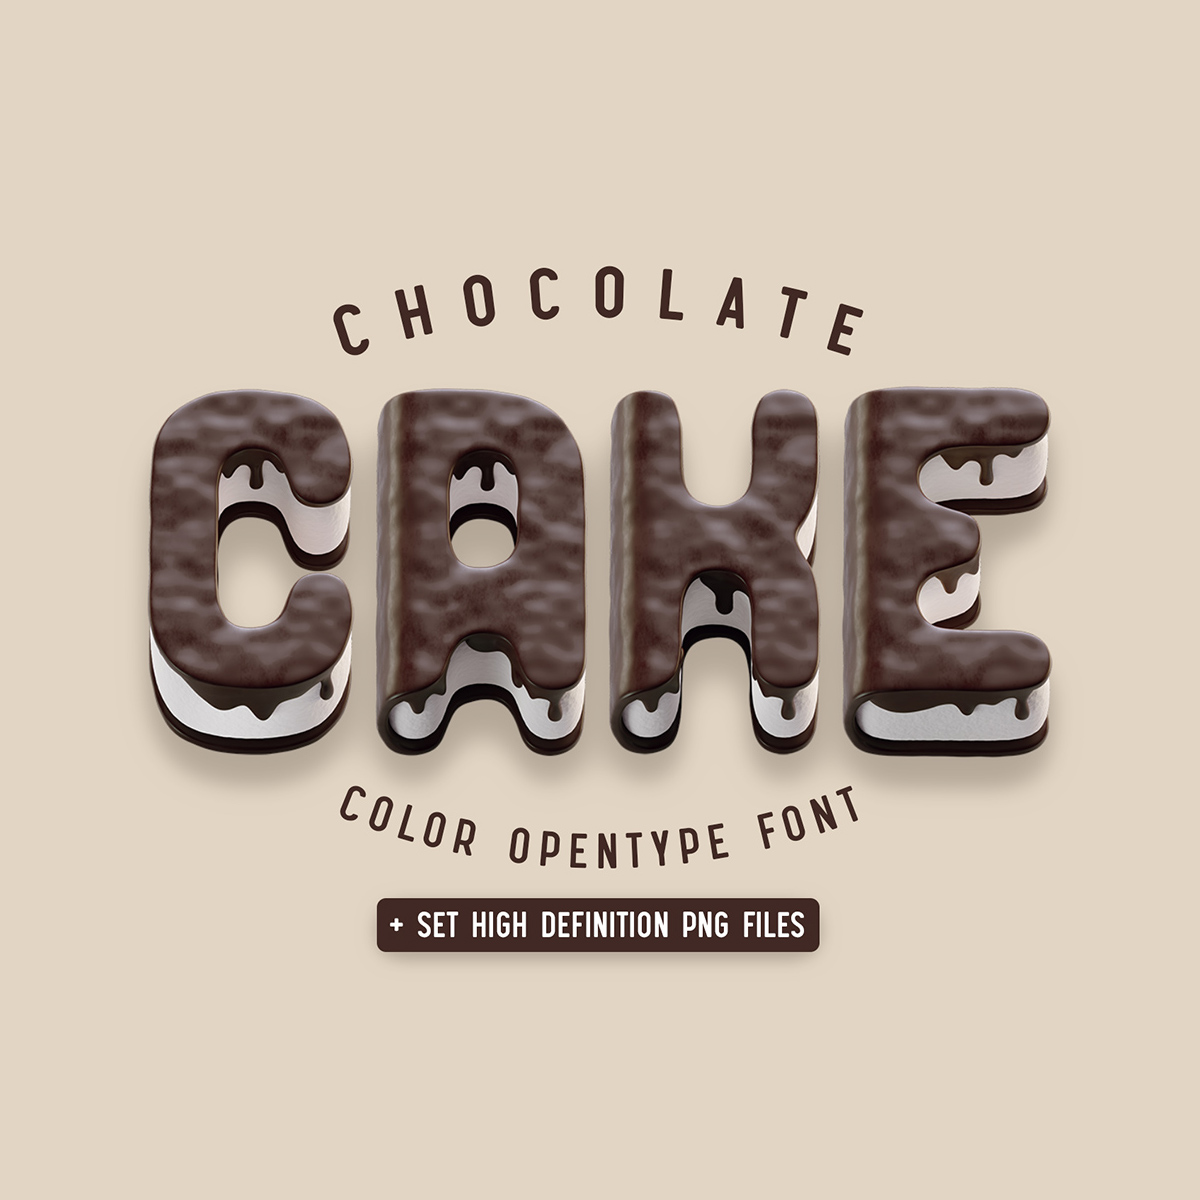 Chocolate Cake - Color Font cover image.